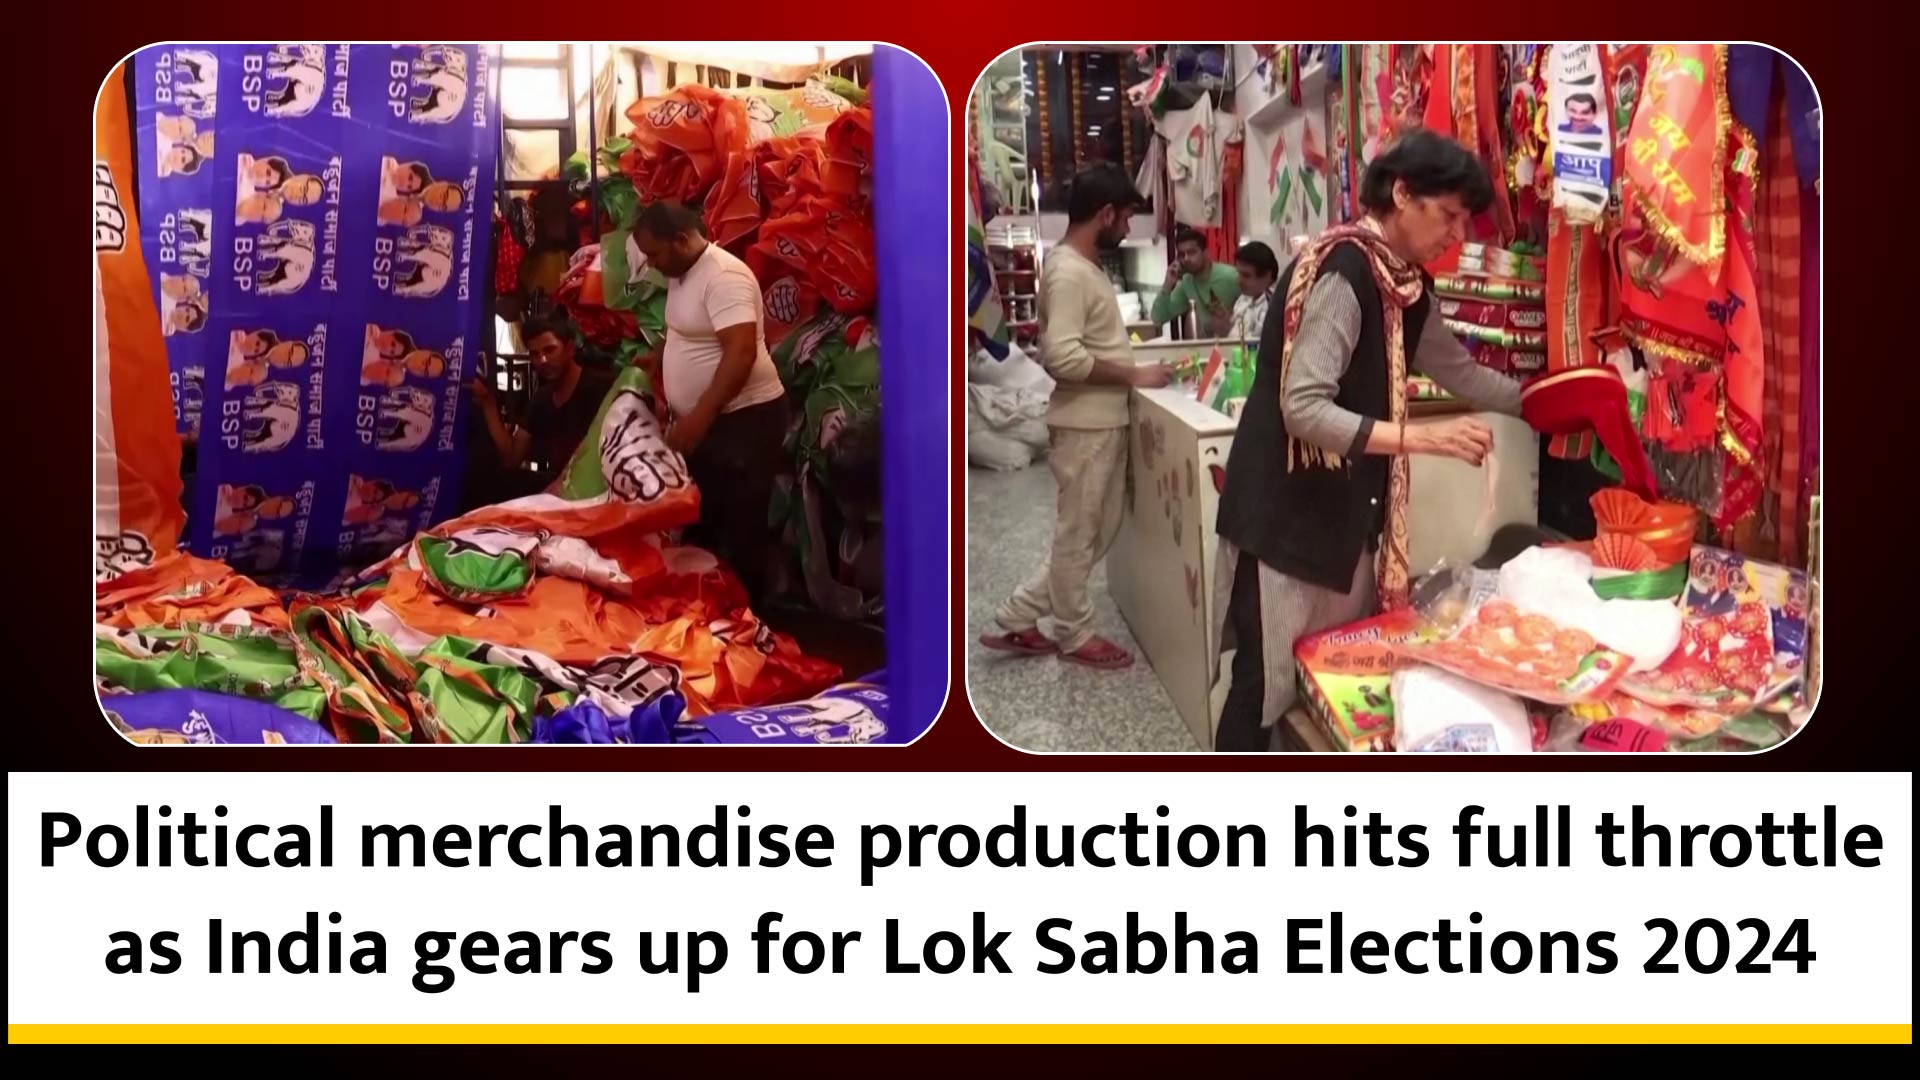 Political merchandise production hits full throttle as India gears up for Lok Sabha Elections 2024